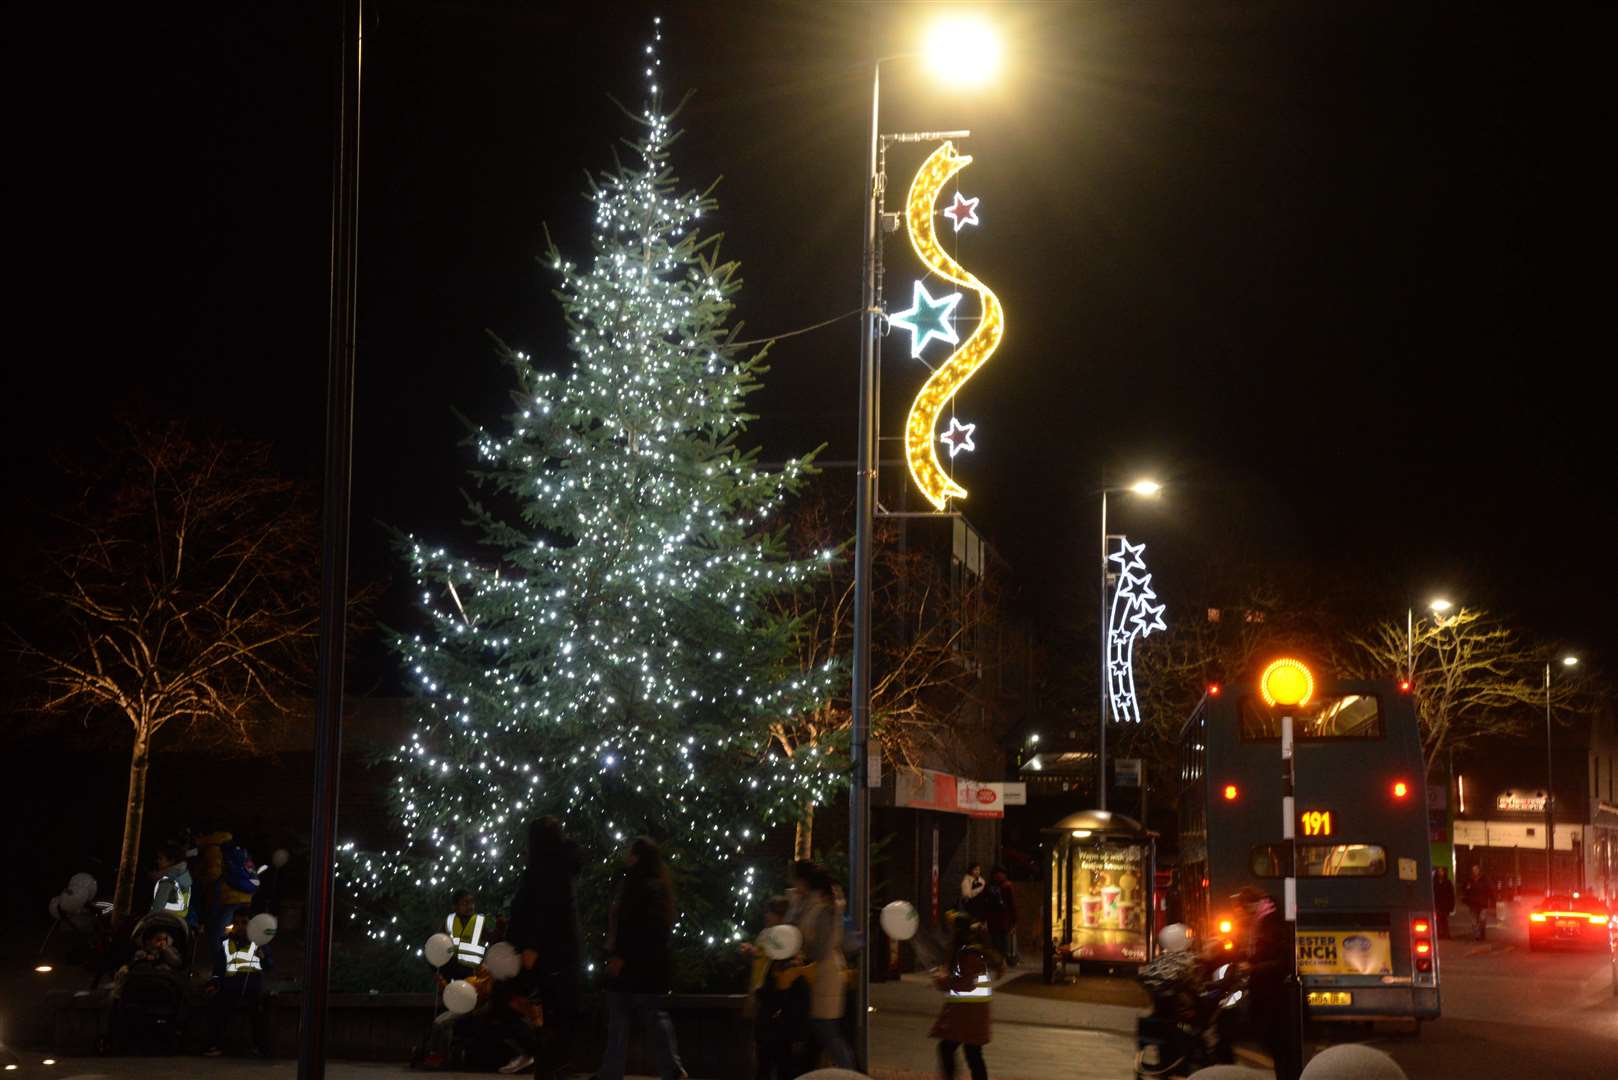 The Christmas lights are on in Strood. Picture: Chris Davey